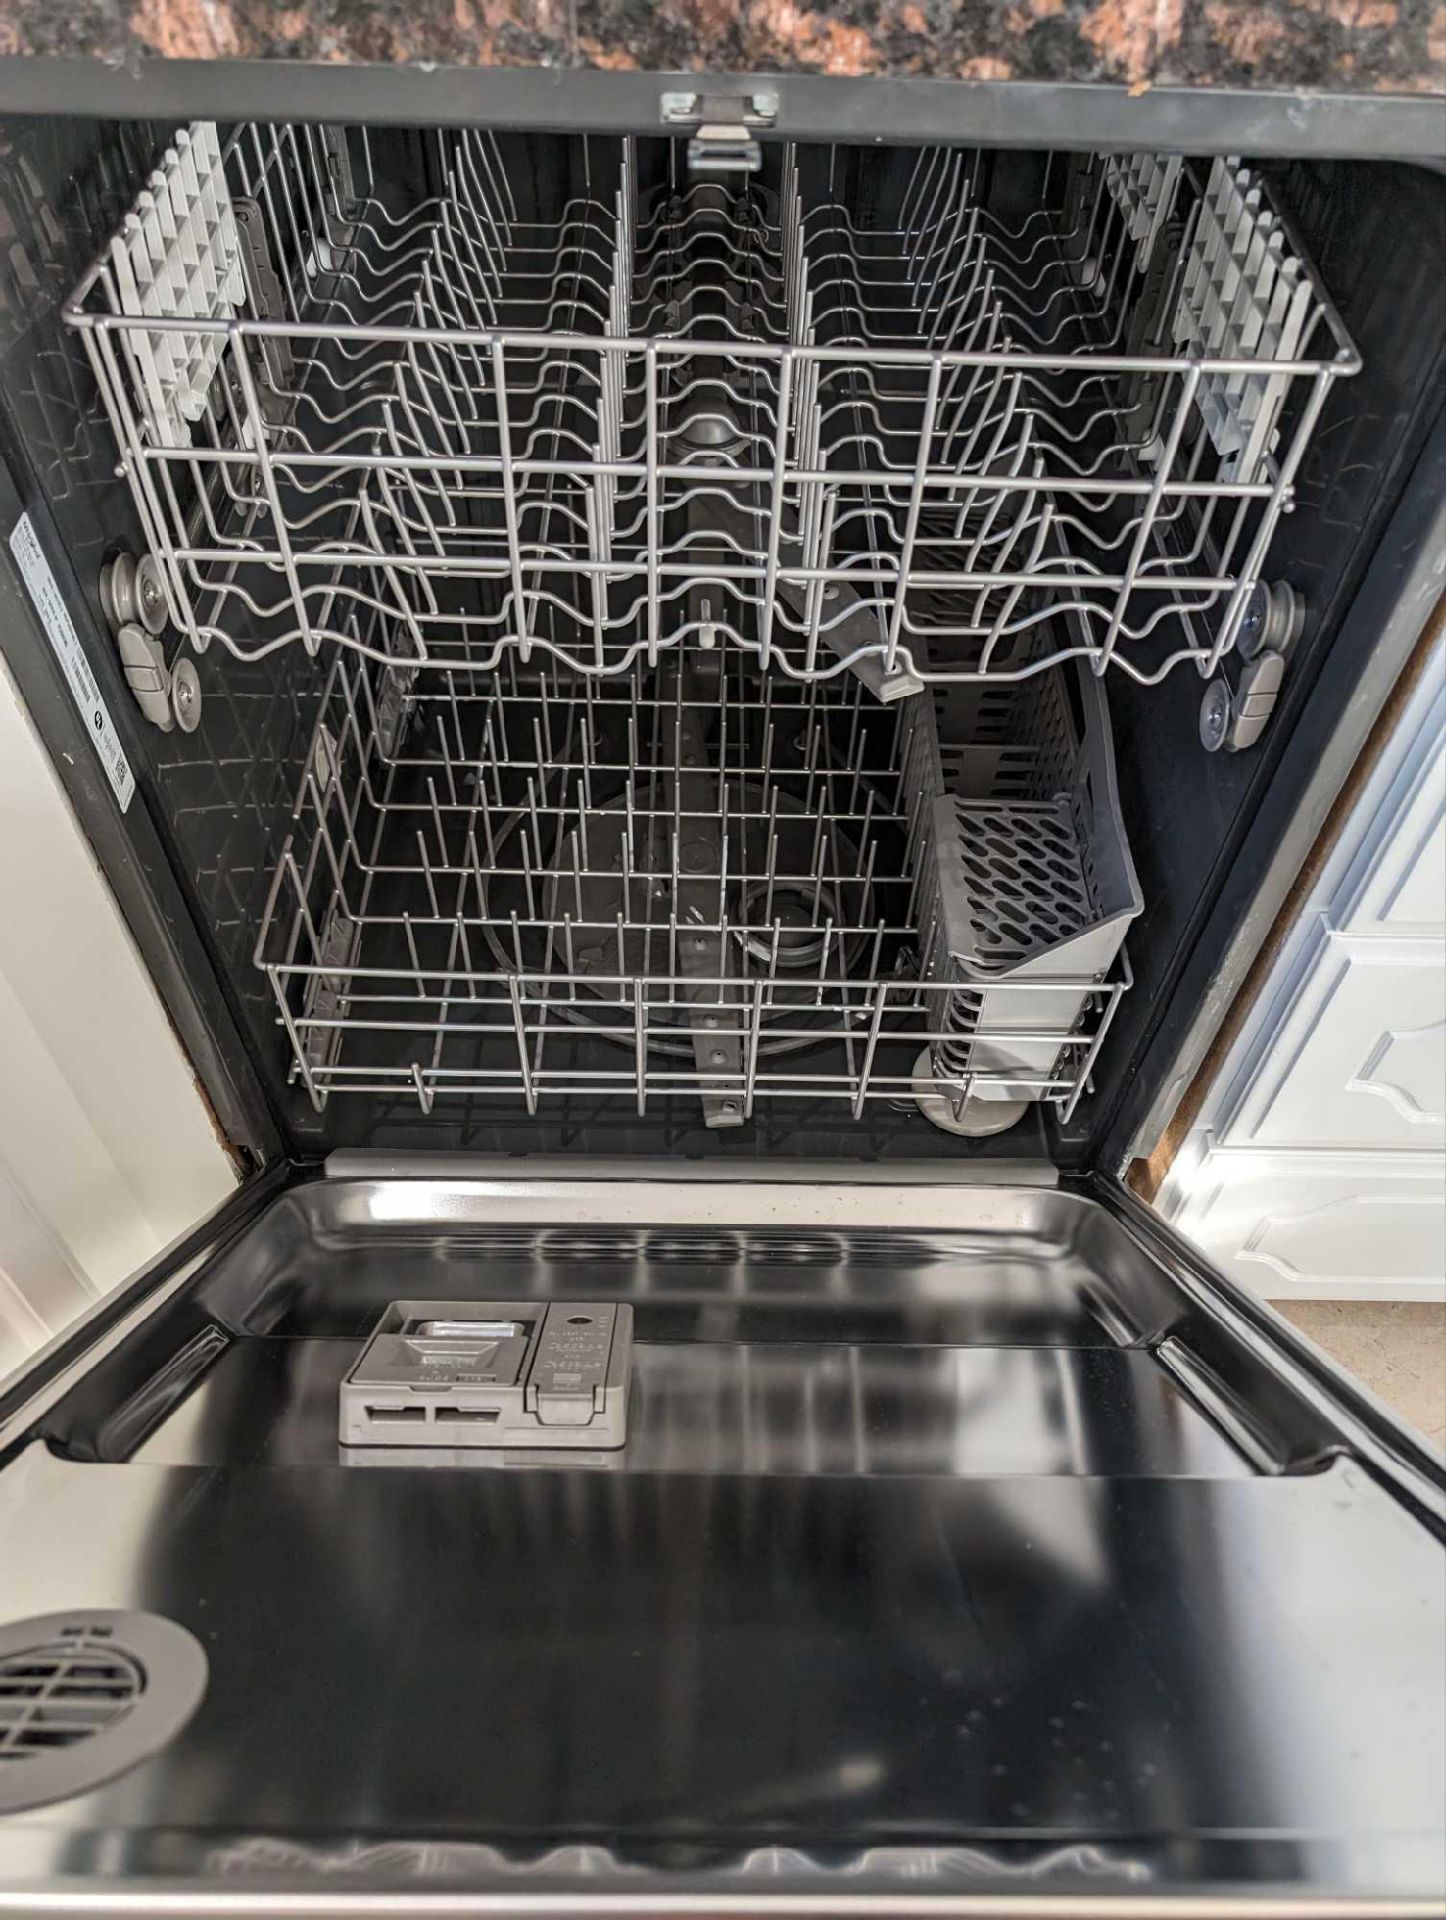 Whirlpool Dishwasher Model: WP540hamz 2 (dishwasher is new and has been installed but never been use - Image 7 of 7